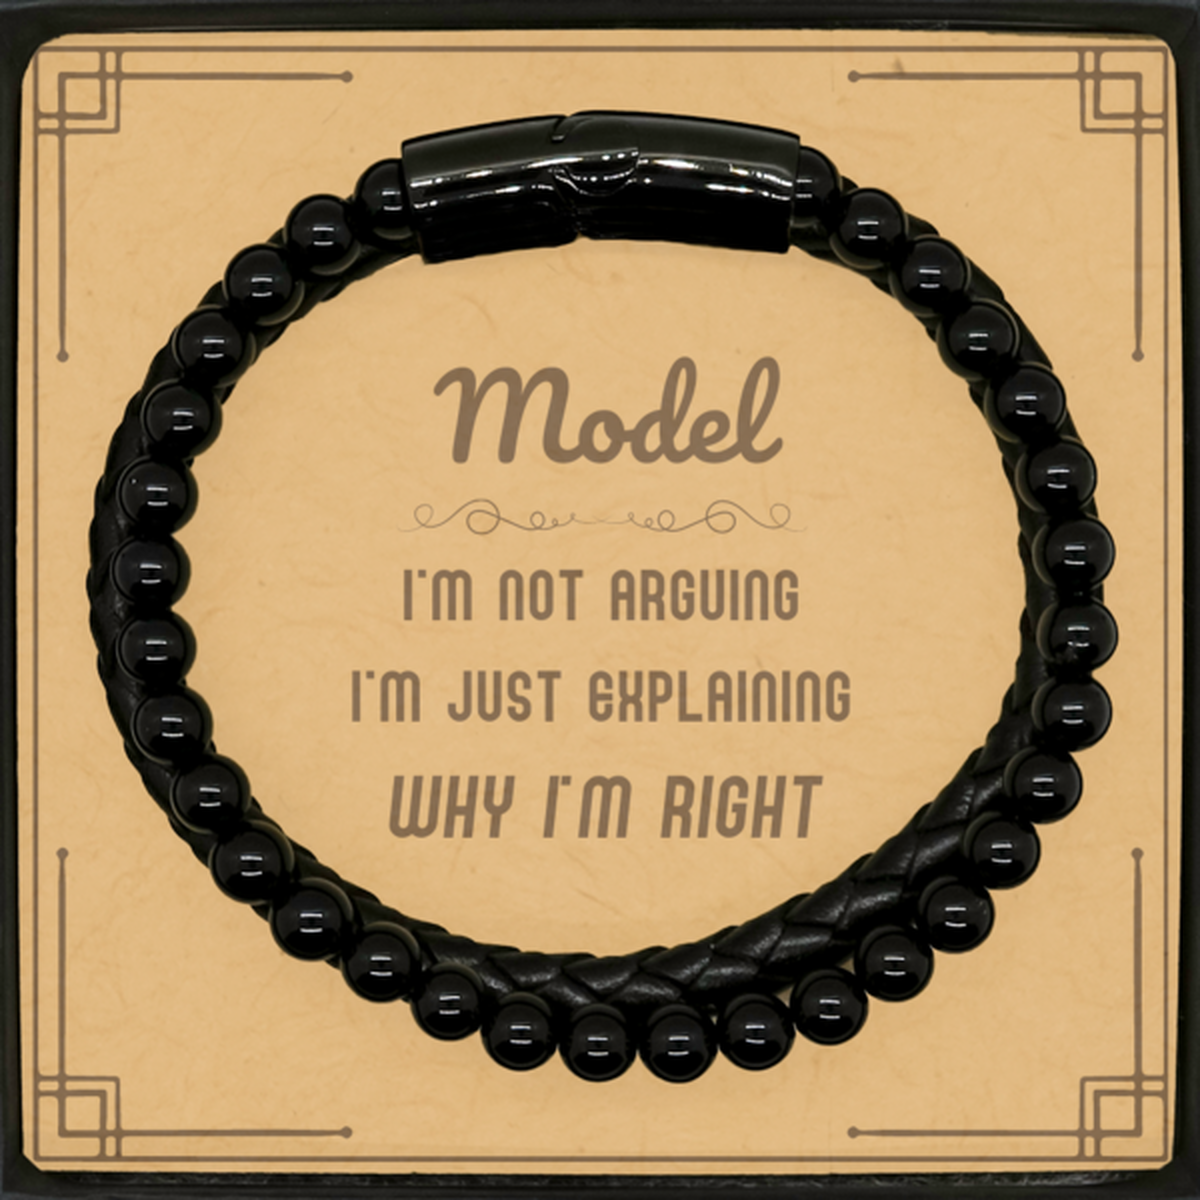 Model I'm not Arguing. I'm Just Explaining Why I'm RIGHT Stone Leather Bracelets, Funny Saying Quote Model Gifts For Model Message Card Graduation Birthday Christmas Gifts for Men Women Coworker